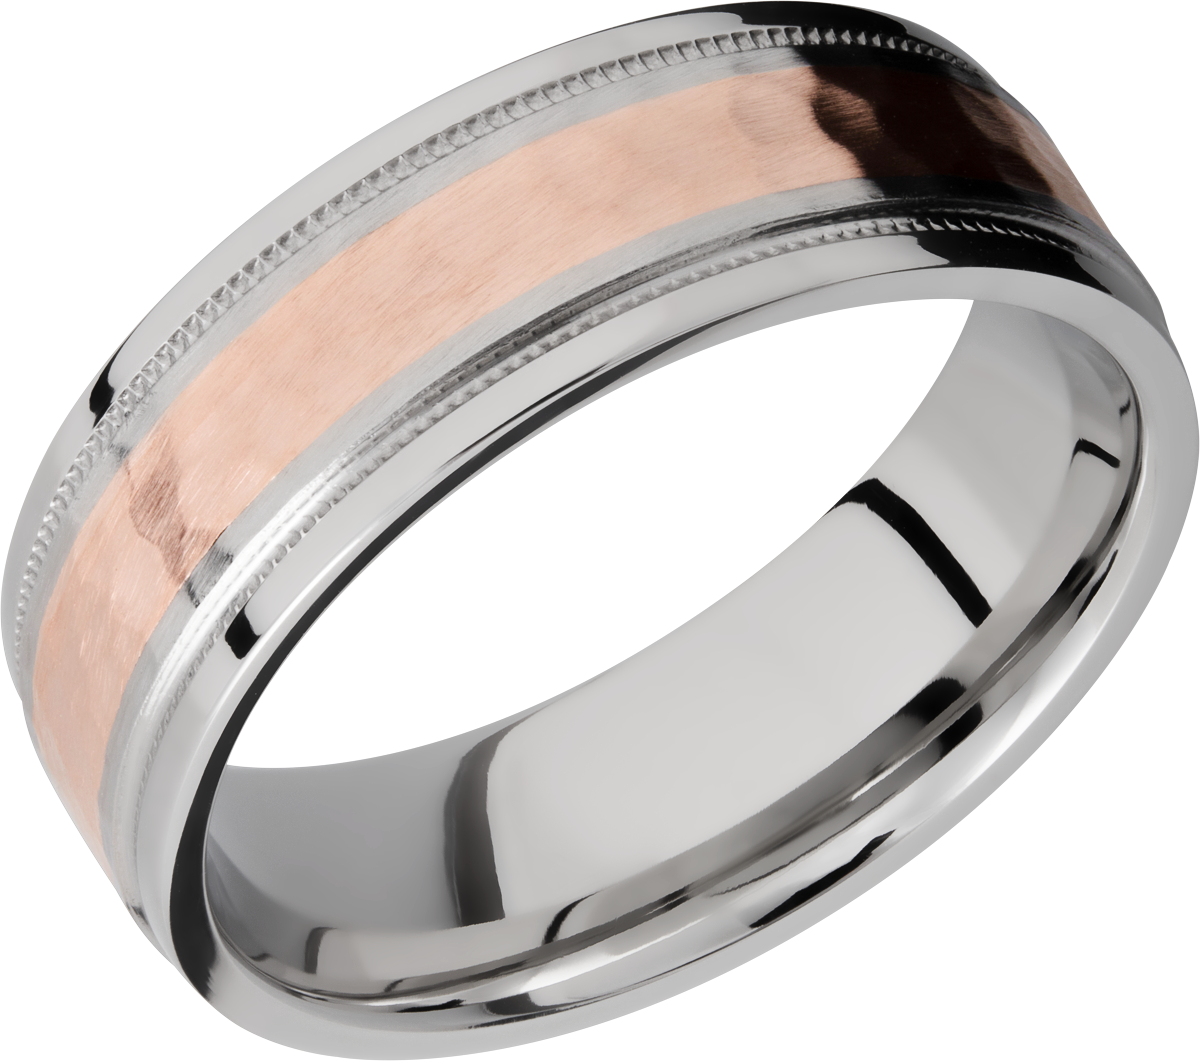 Cobalt chrome 7.5mm flat band with grooved edges with wide set milgrain. With one inlay that is 3mm